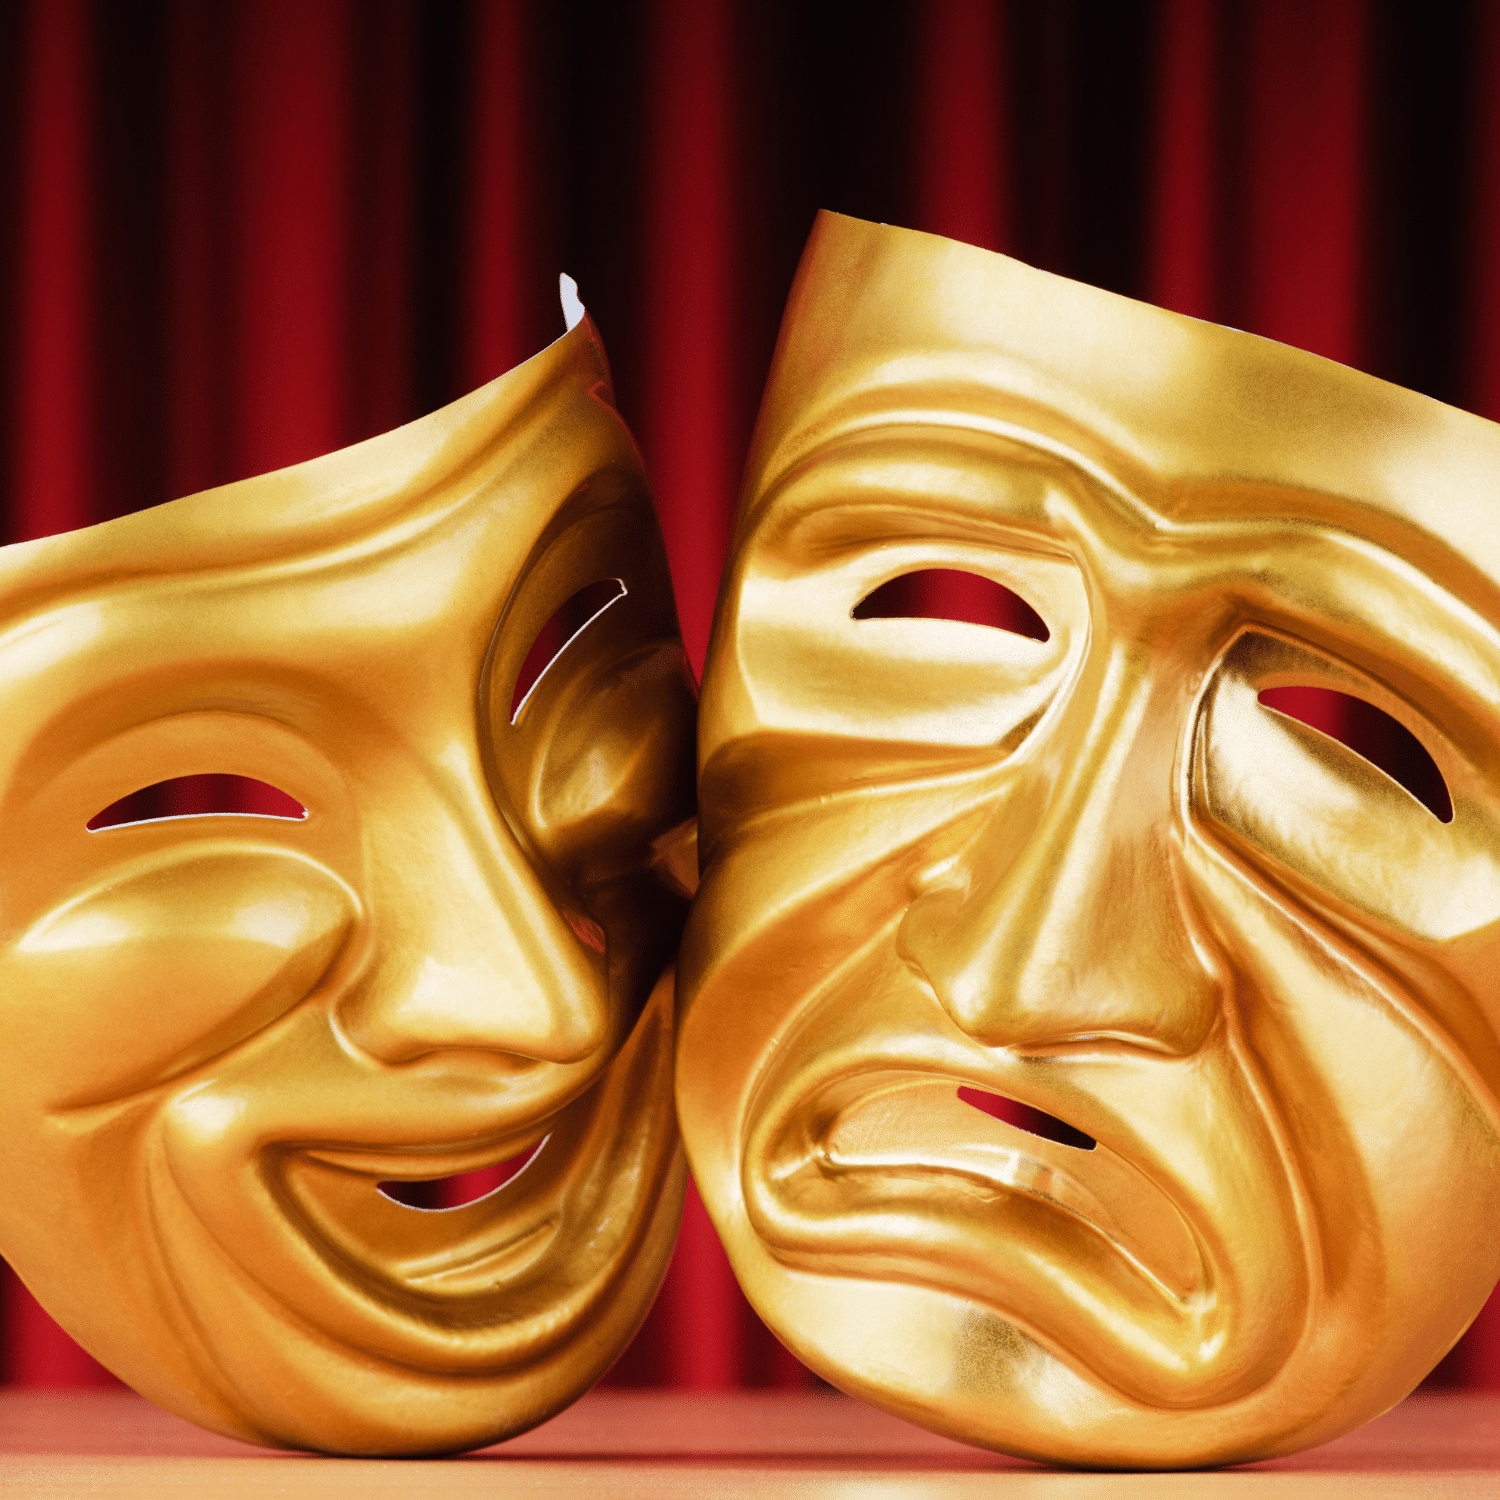 Golden drama masks. One depicting joy and the other showing sadness